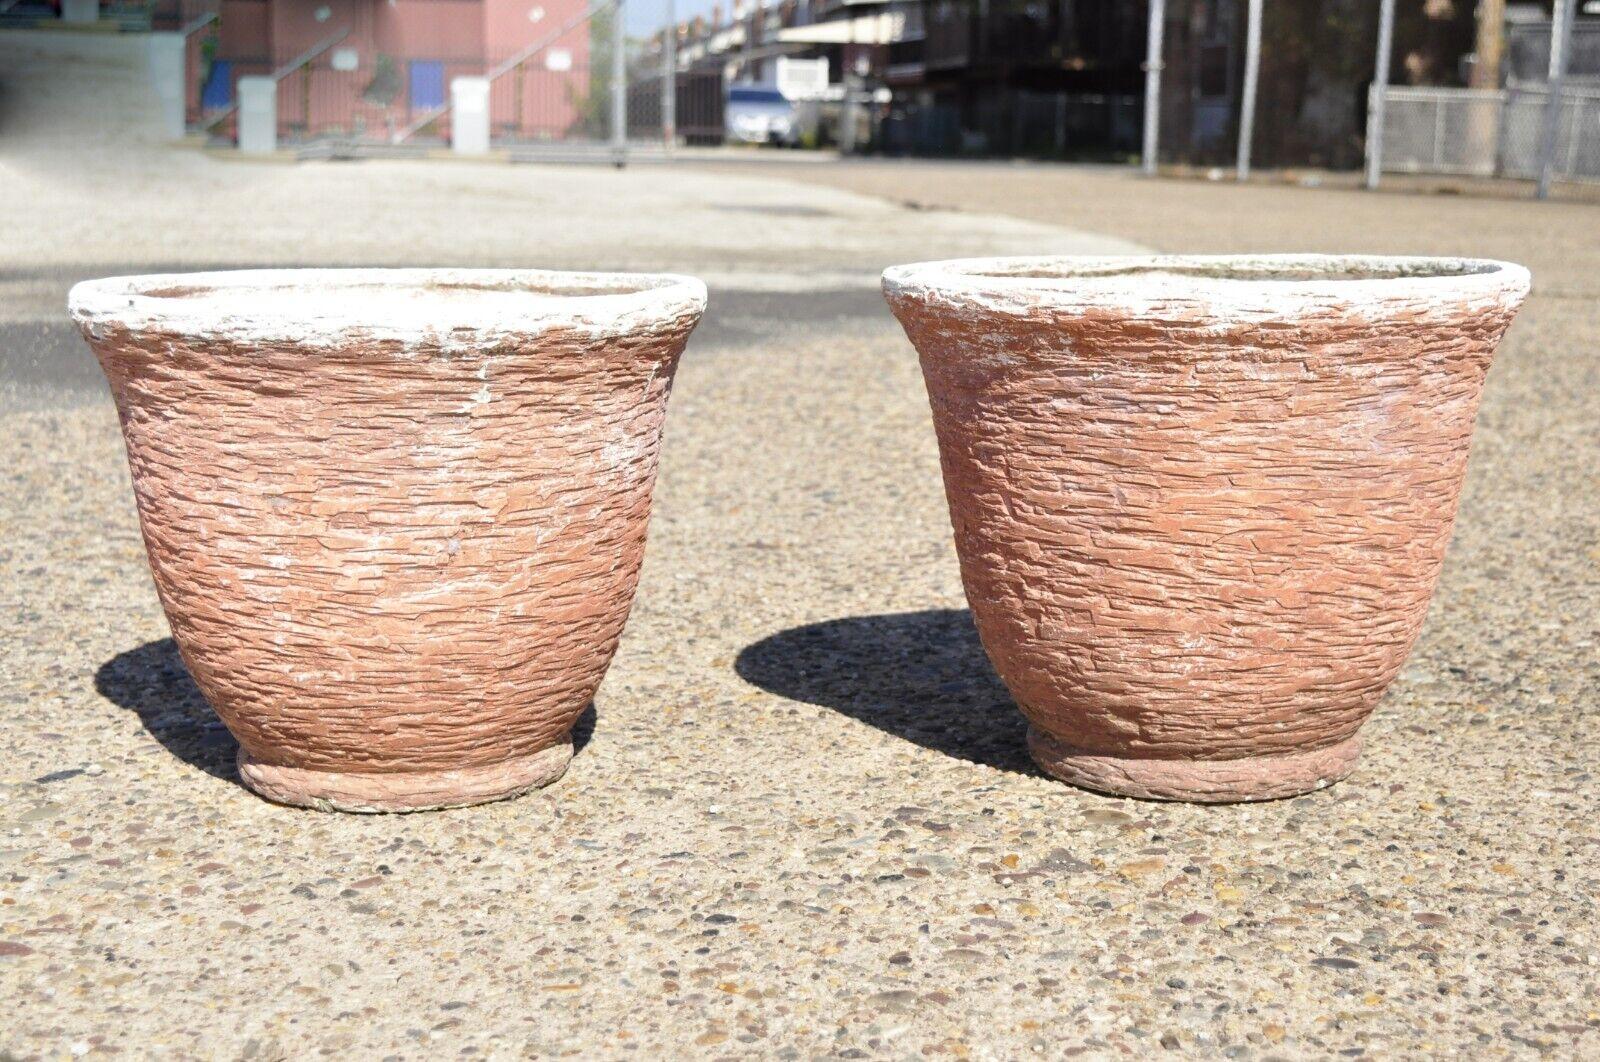 Vintage Red Distressed Painted Fiberglass Round Garden Planter Pots Faux Stone - a Pair. Item features faux terracotta stone form, woven and cast fiberglass construction, distressed painted finish, very nice vintage pair, great style and form. Circa